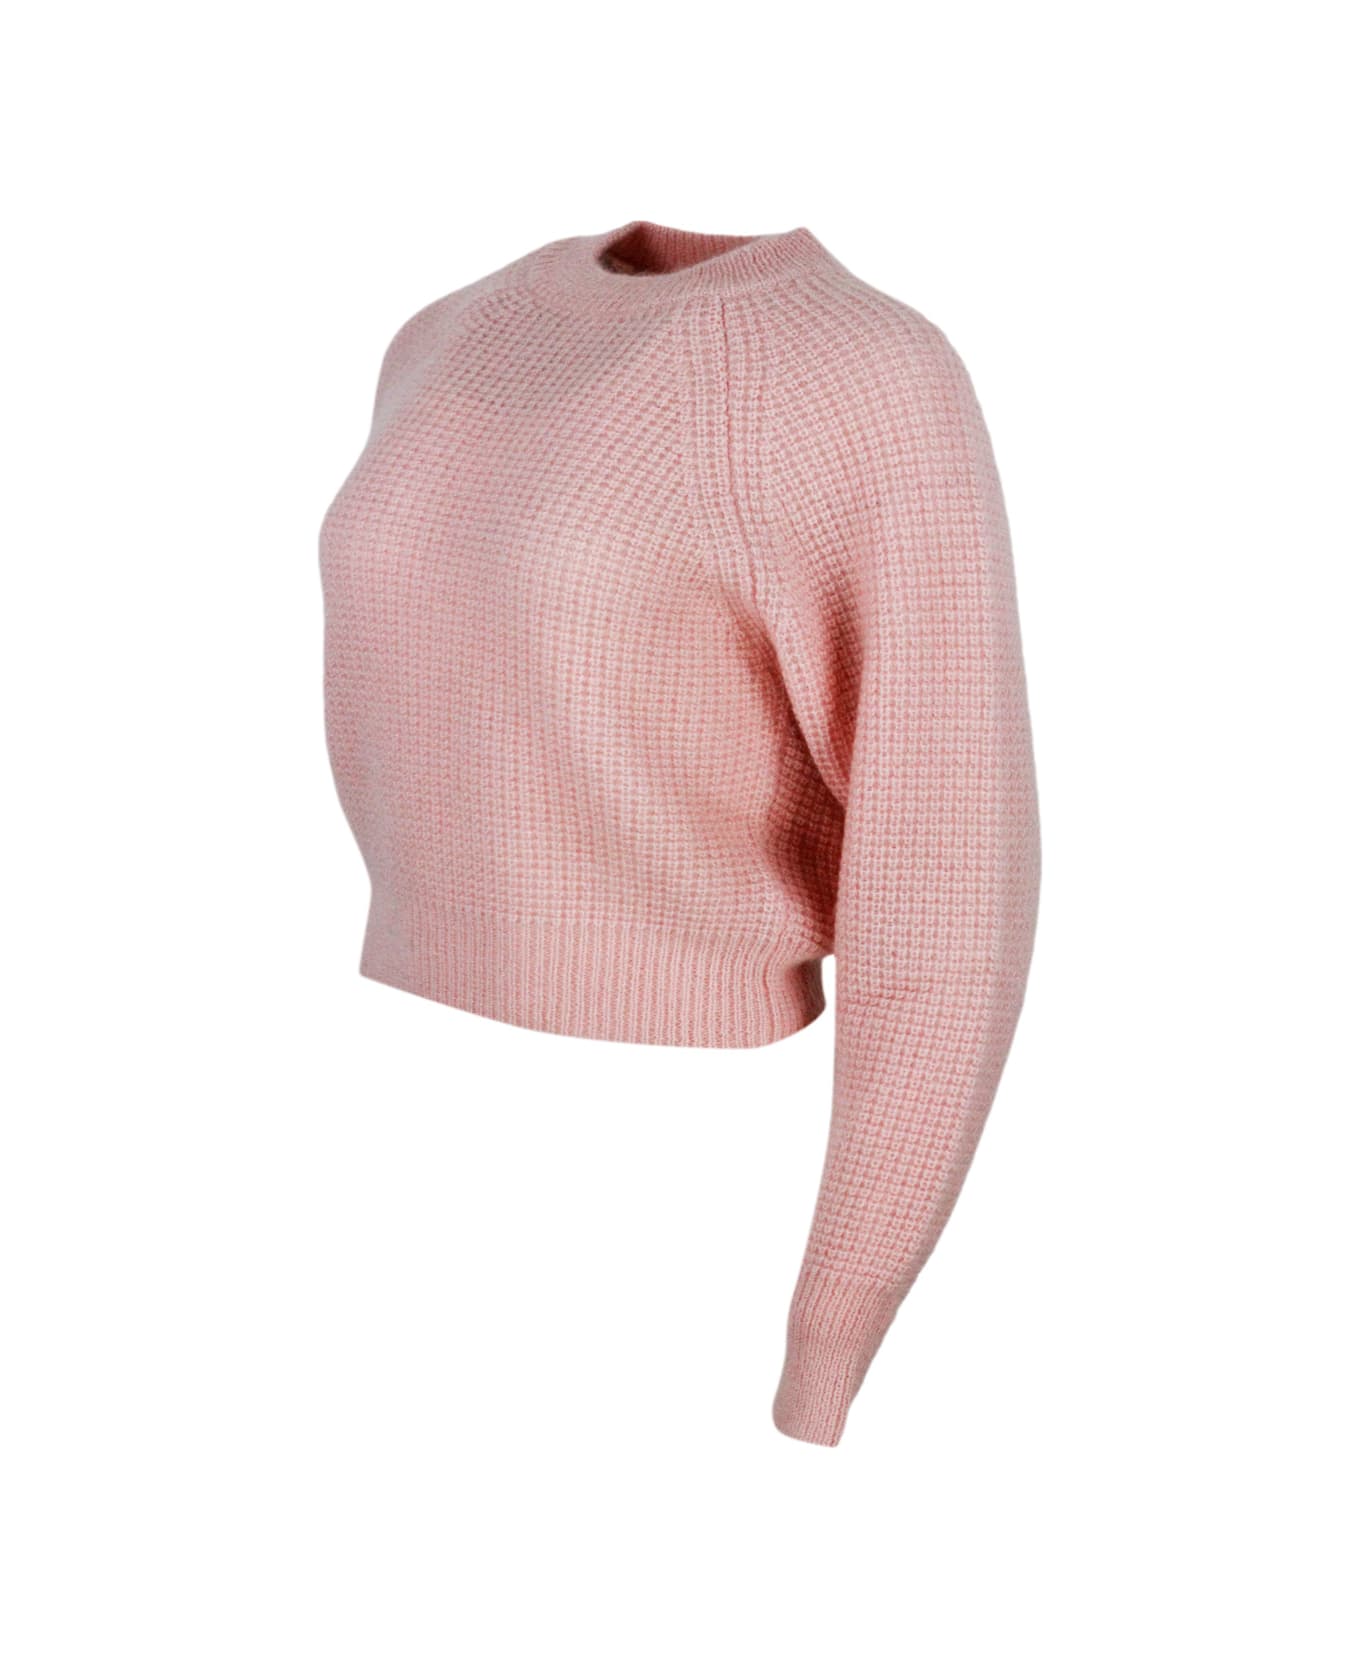 Fabiana Filippi Long-sleeved Crew-neck Sweater In Mohair, Cropped Model With Raglan Sleeves And Diamond Stitch Work - Pink ニットウェア